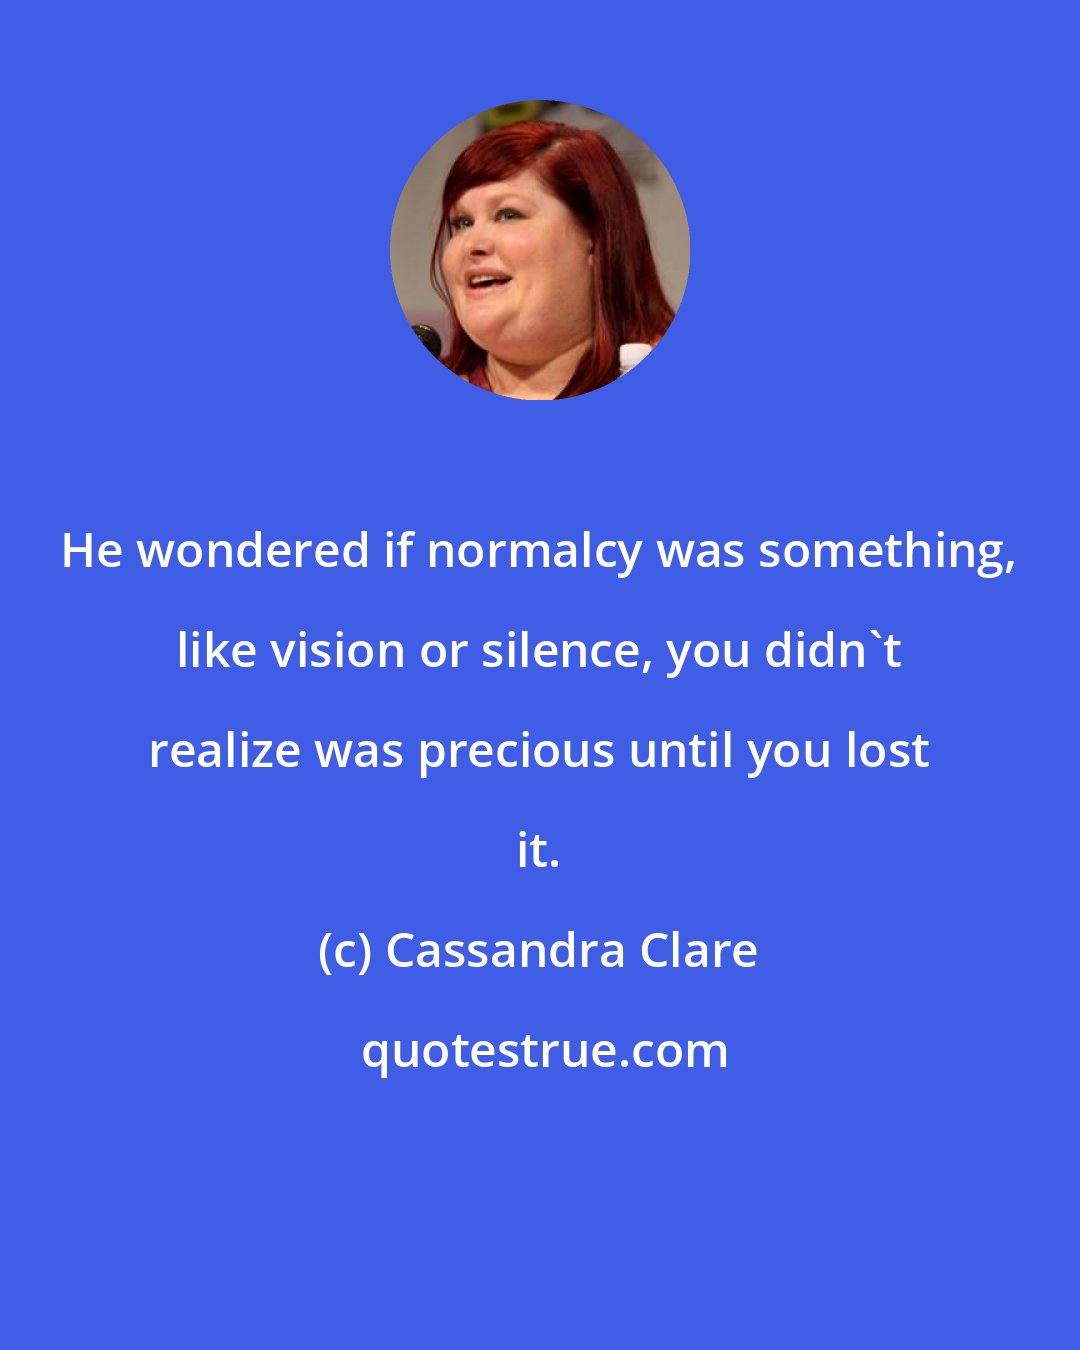 Cassandra Clare: He wondered if normalcy was something, like vision or silence, you didn't realize was precious until you lost it.